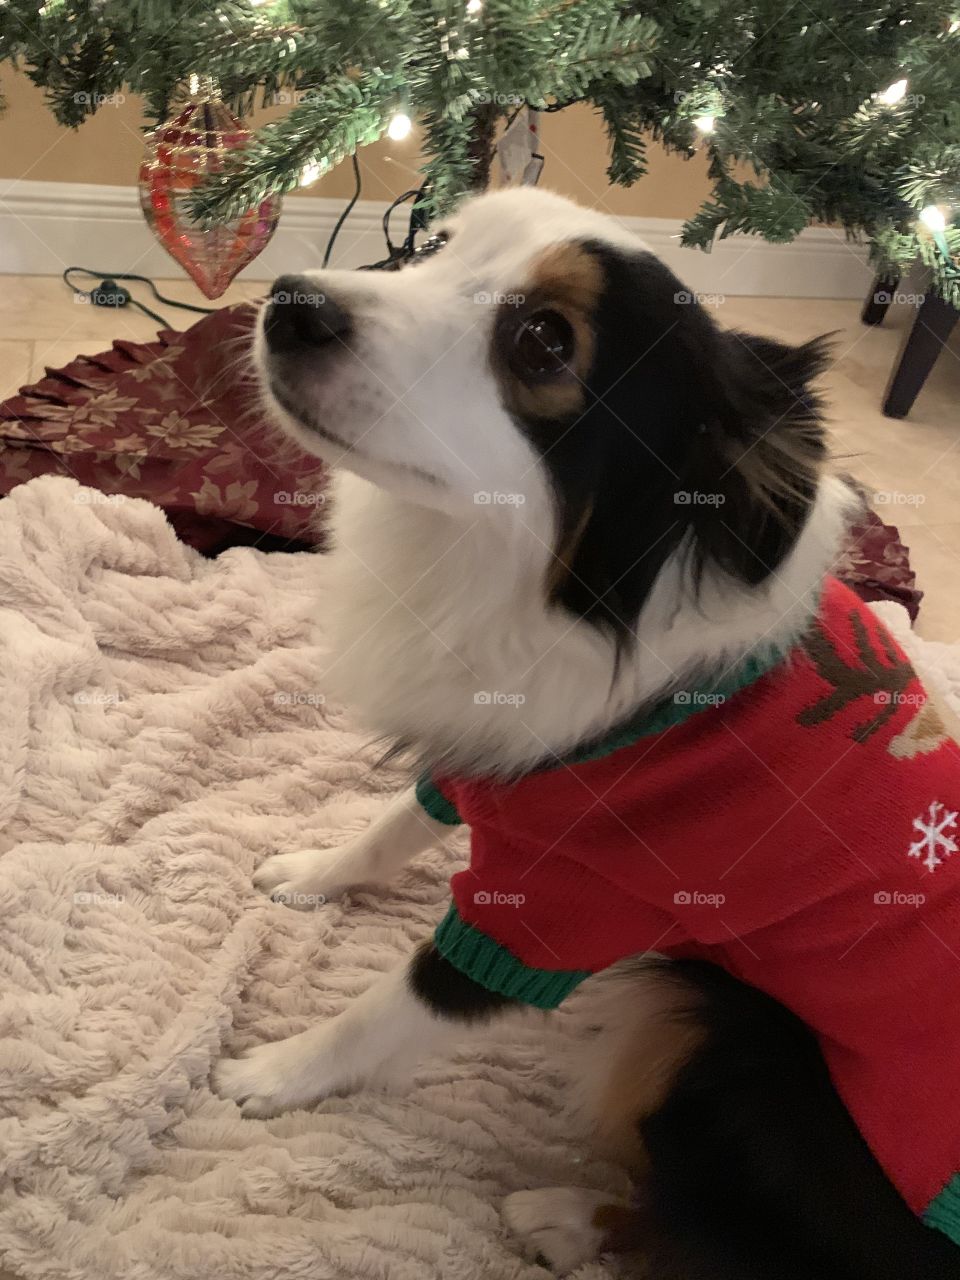 Celebrating the holidays with pets